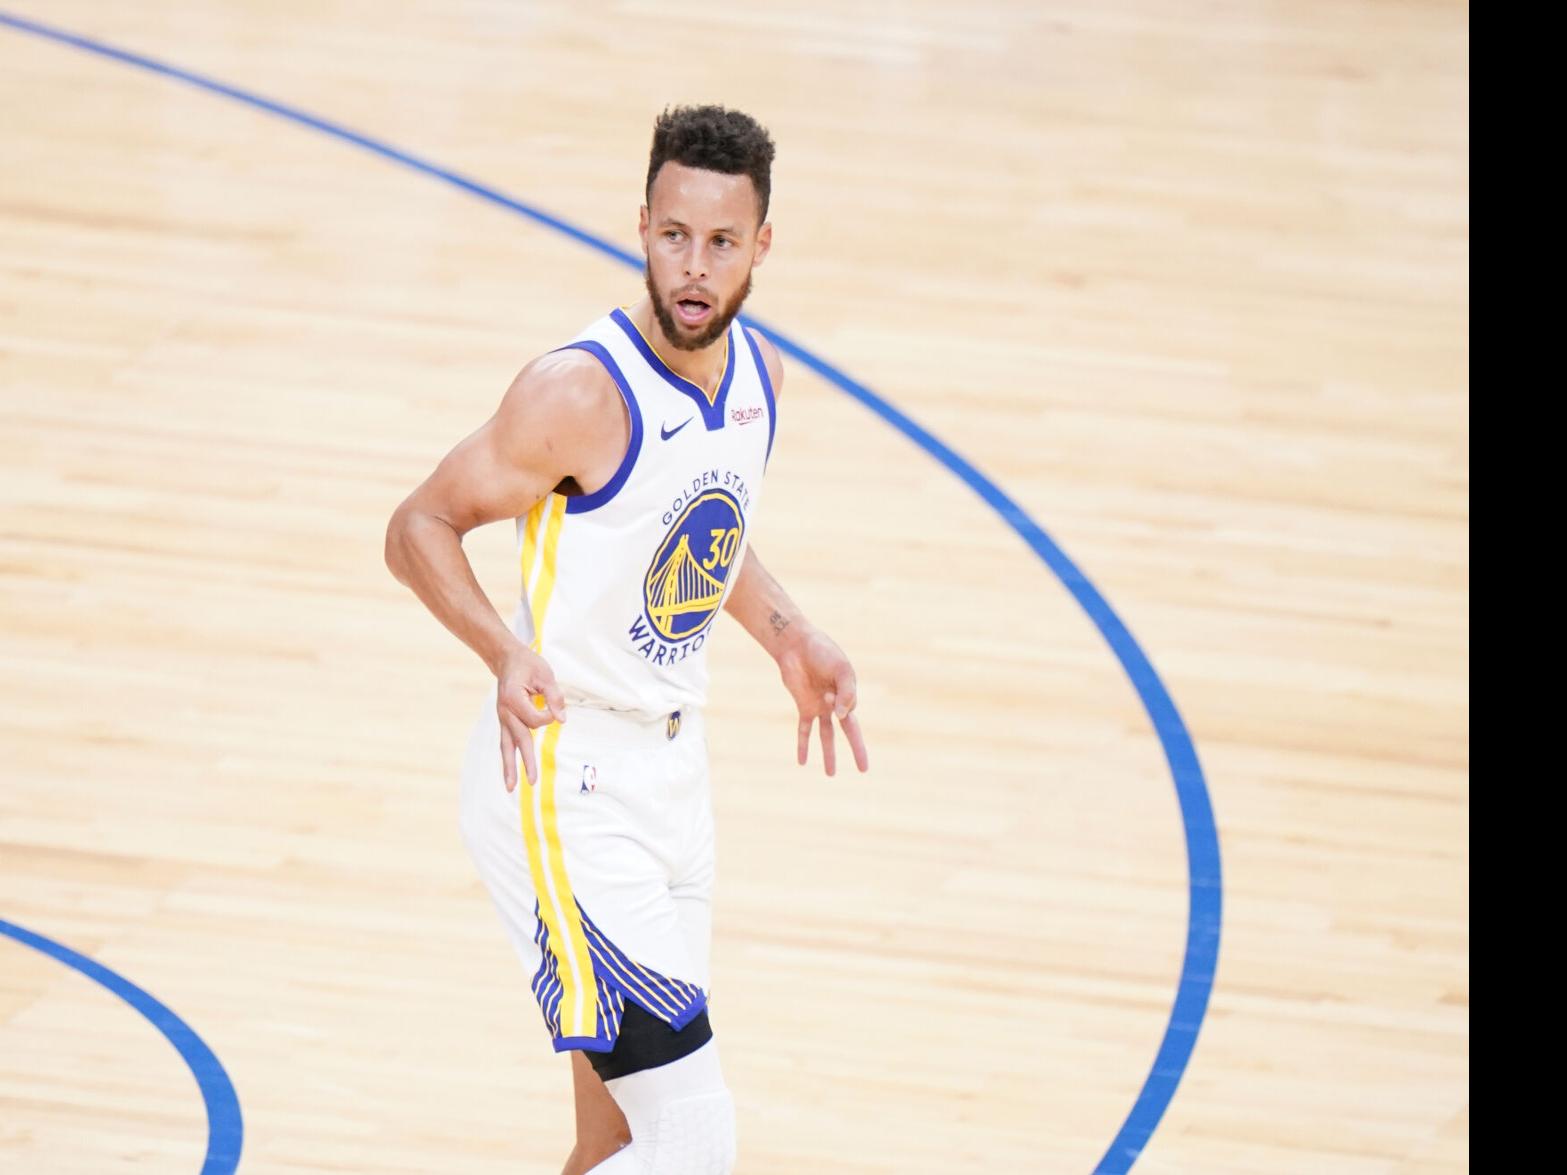 Bruised Warriors star Stephen Curry ready to go in Game 5